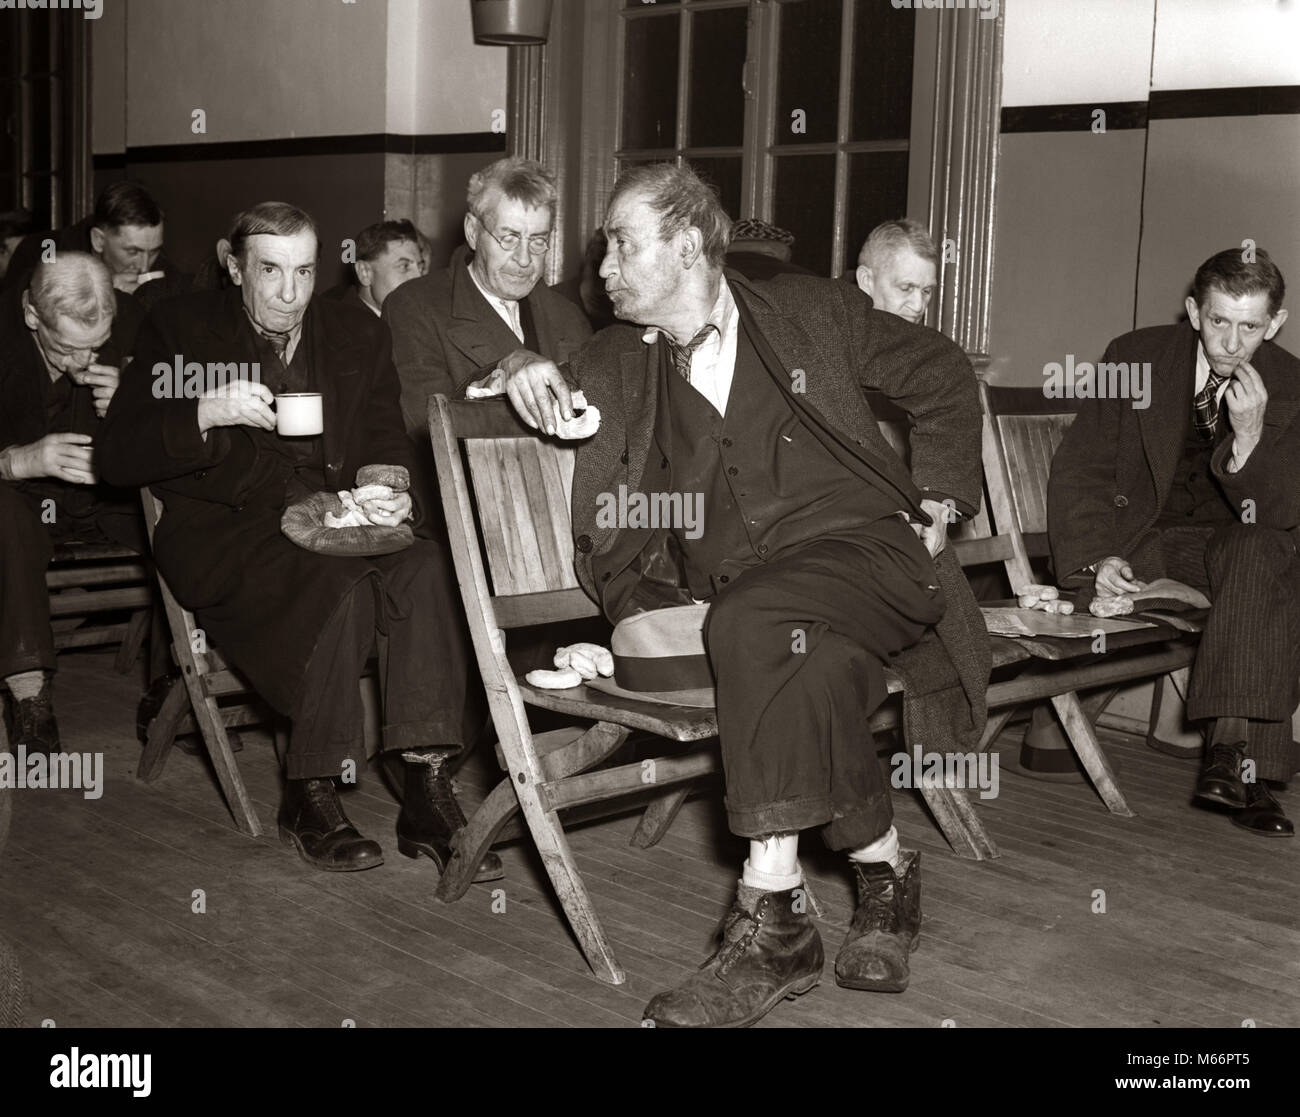 1930s During Great Depression Unemployed Men Sitting In Room On Wooden Chairs Drinking Coffee